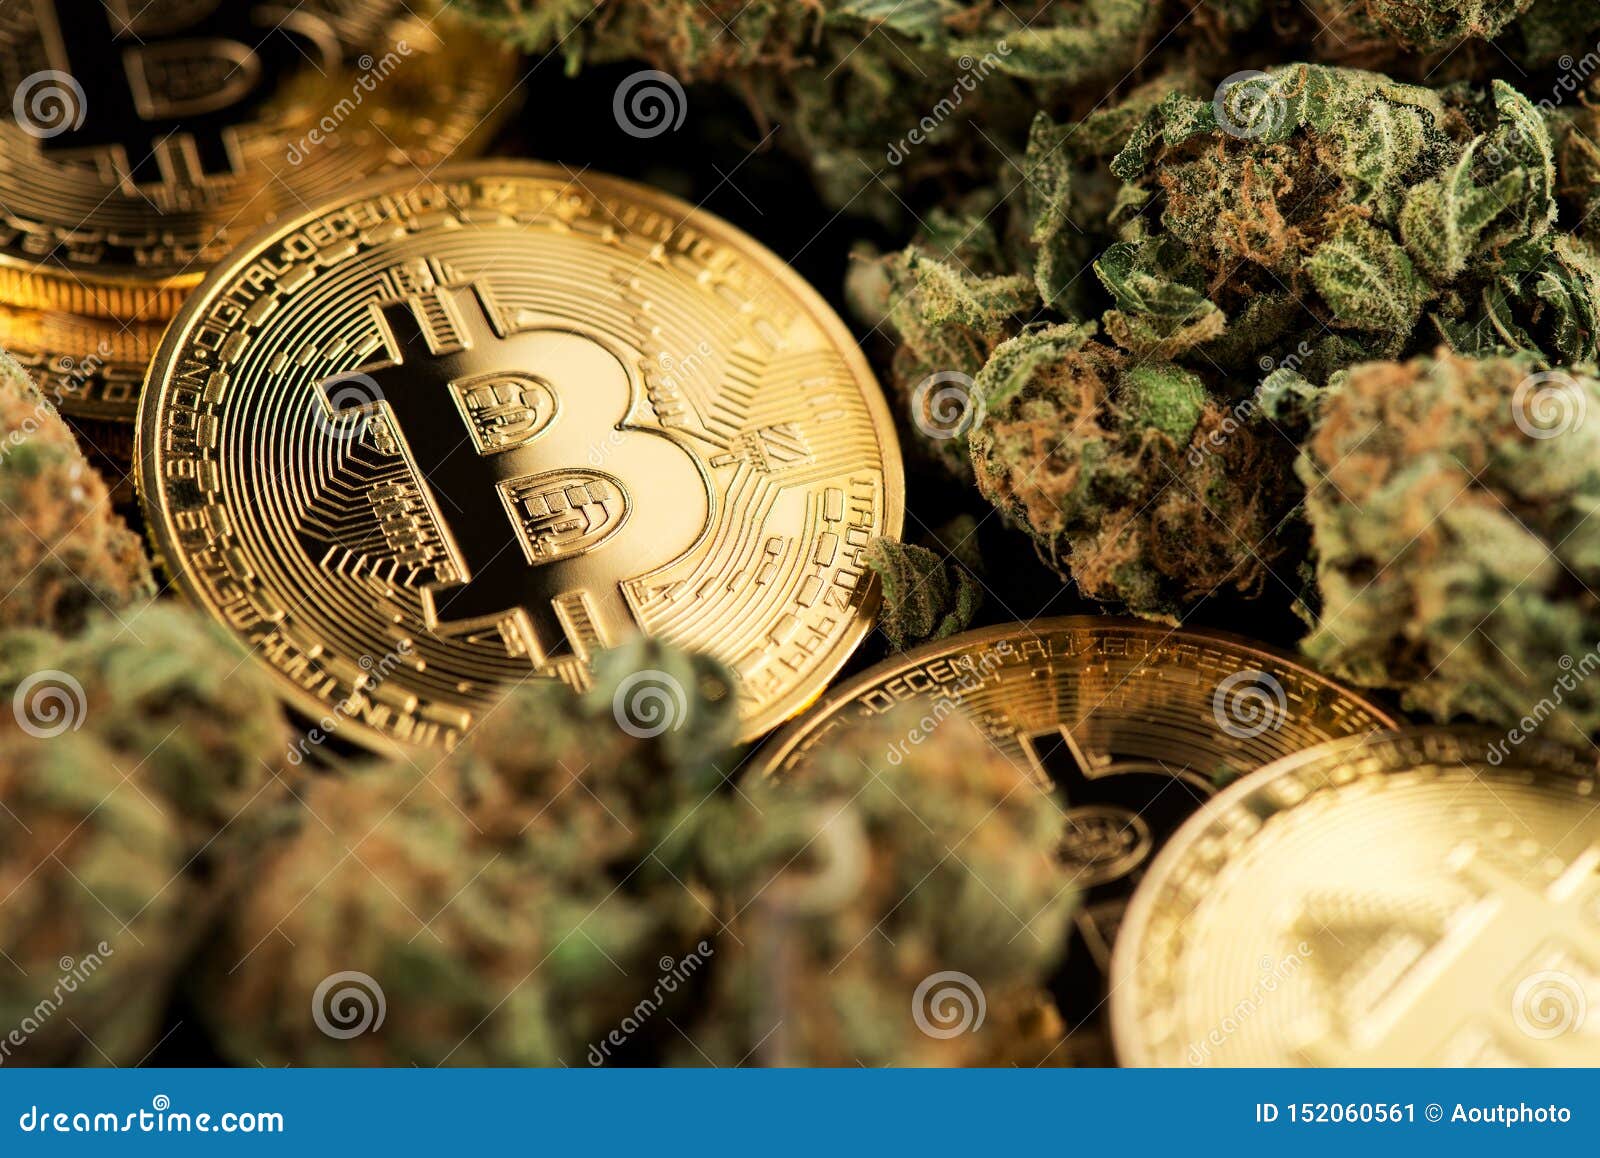 cryptocurrency and cannabis